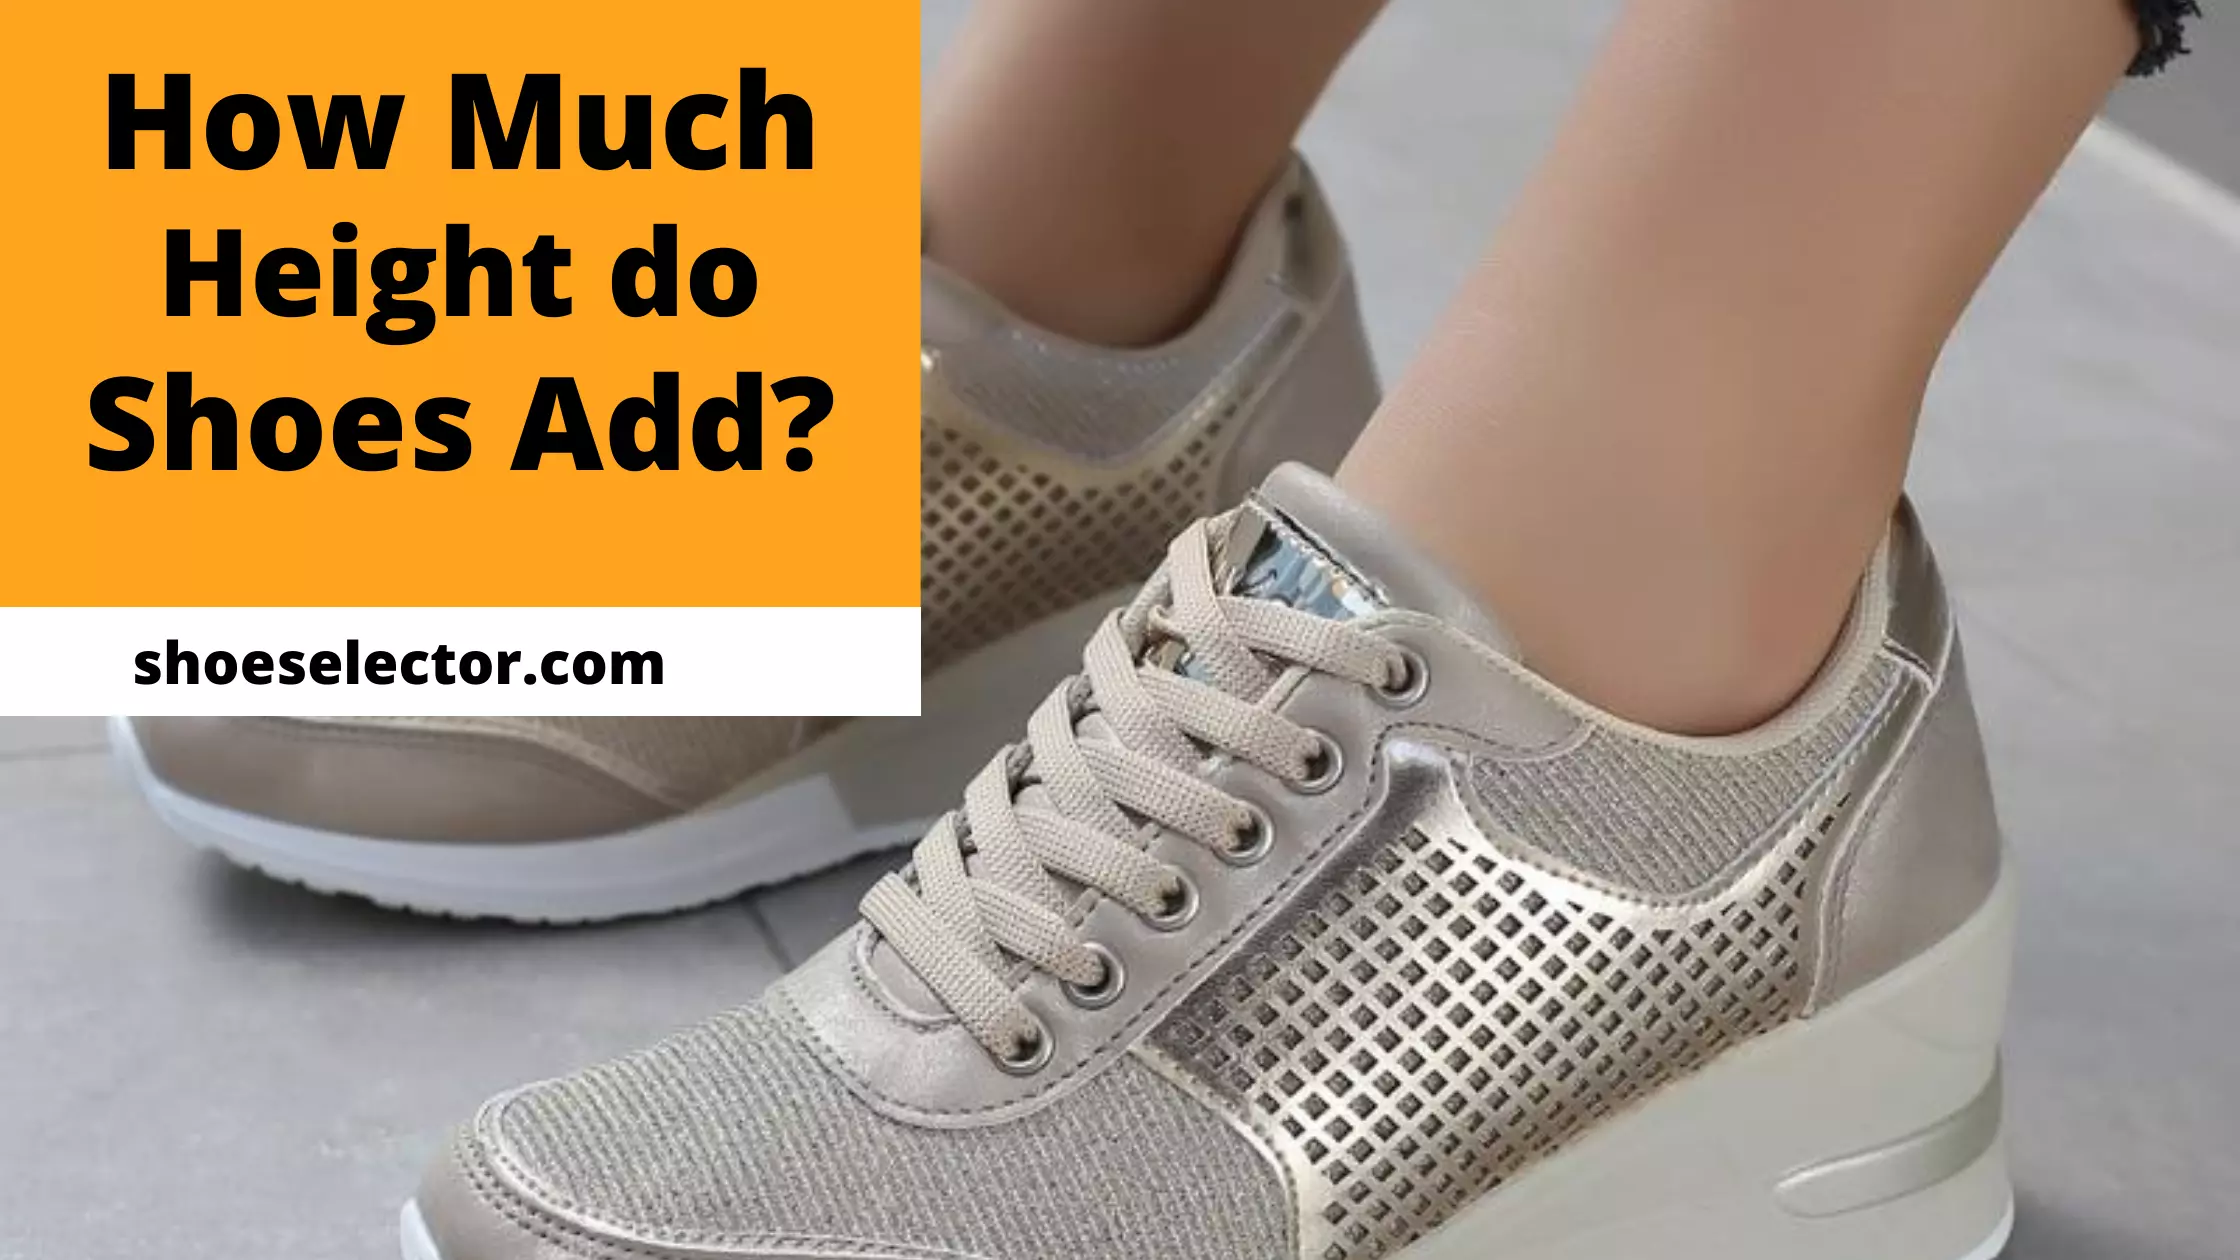 How much Height do Shoes Add? Learn Some Important Tips